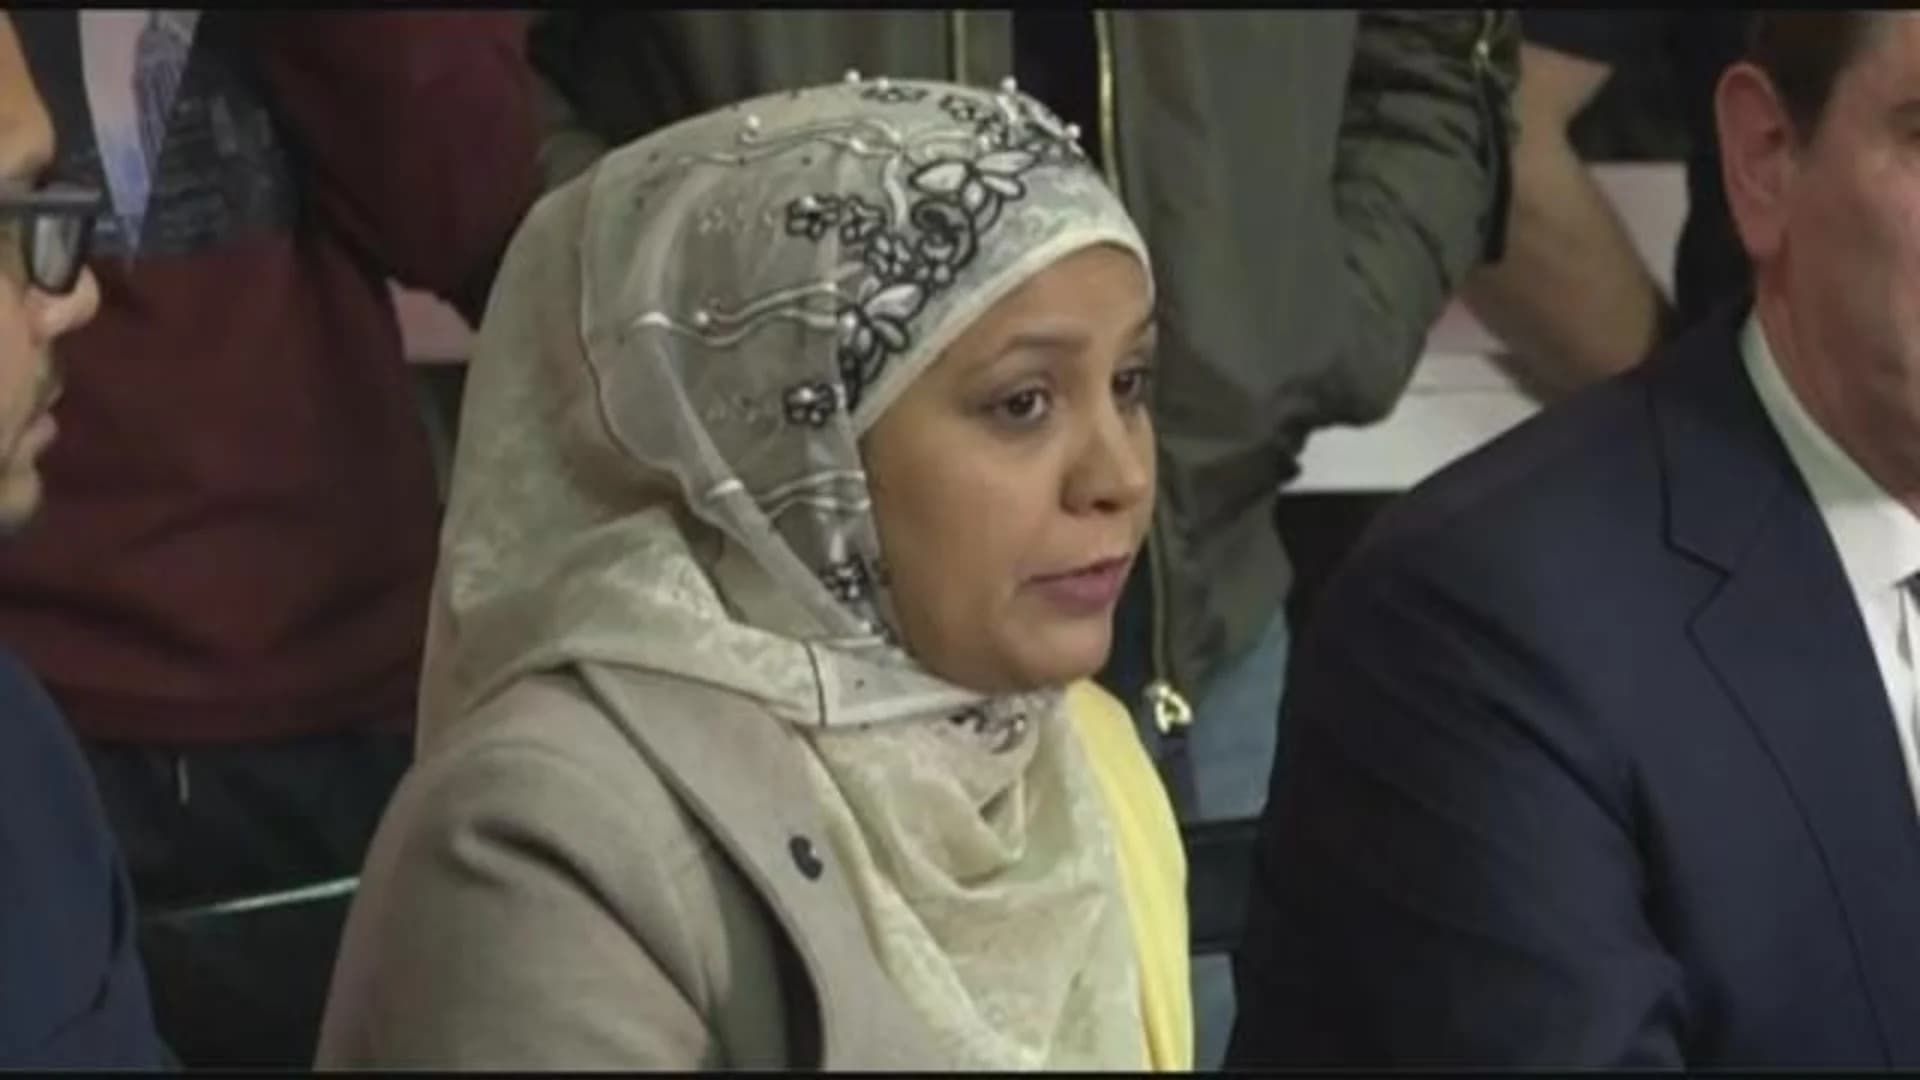 Muslim woman says she was assaulted for wearing hijab